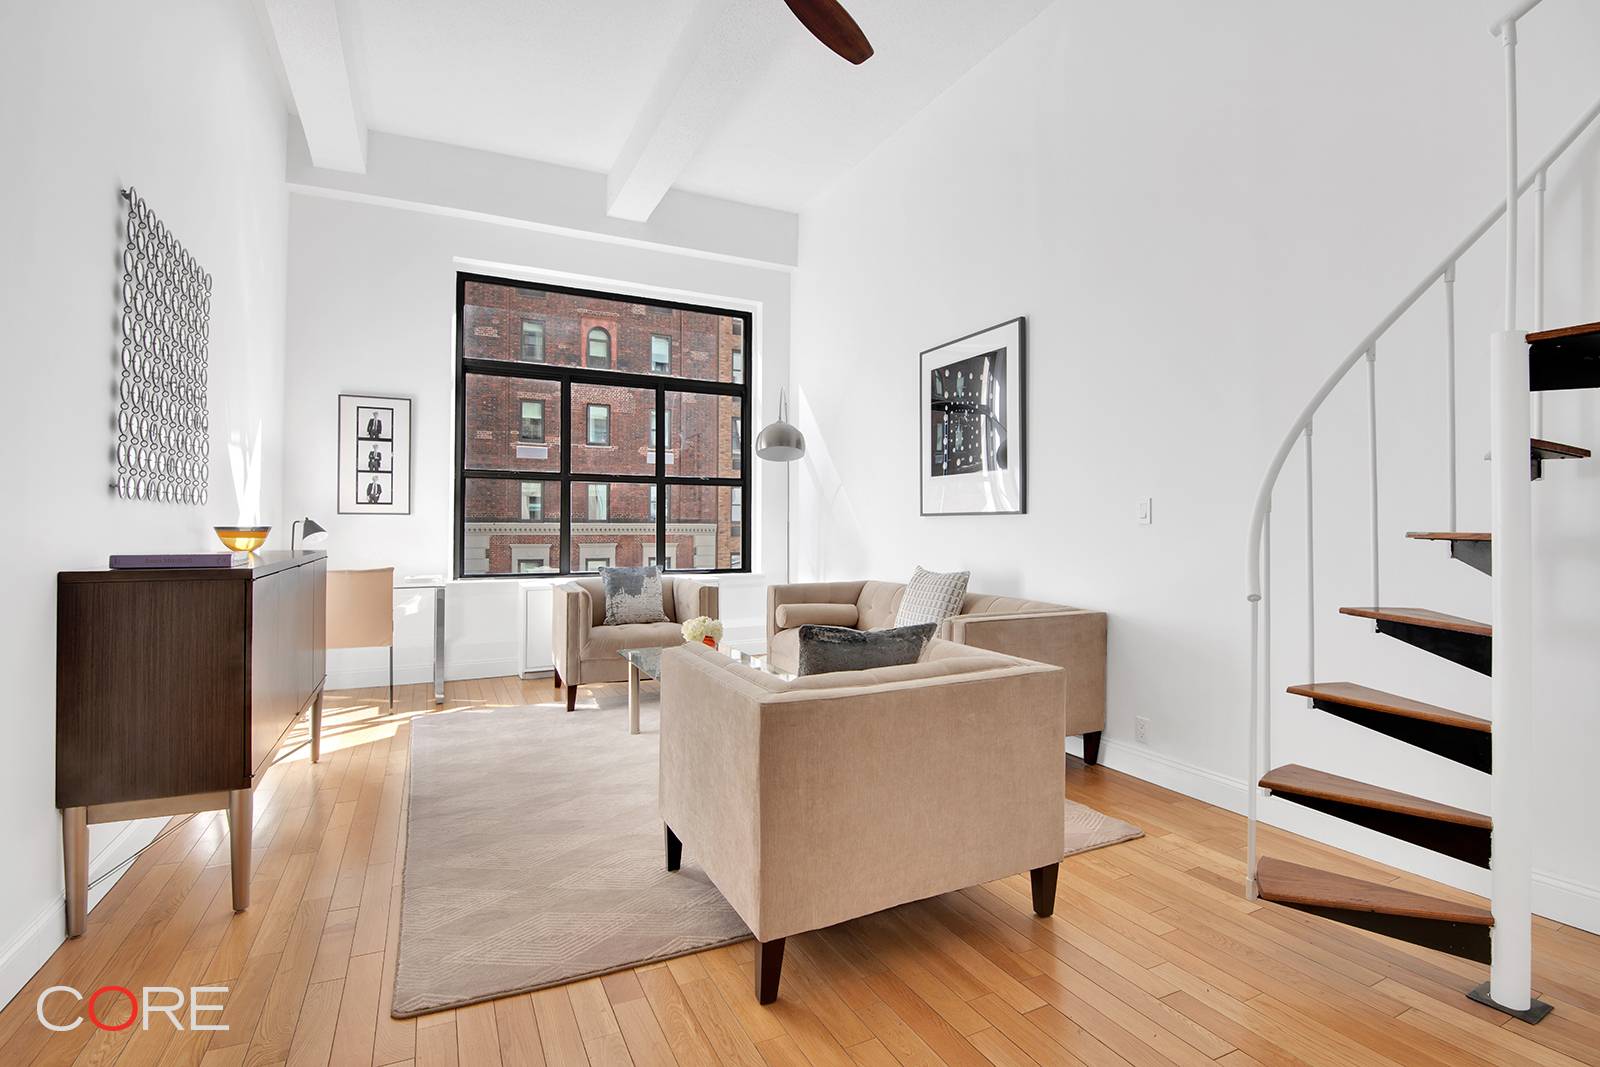 Dazzling sunlight and space abound in this beautifully renovated spectacular studio loft.